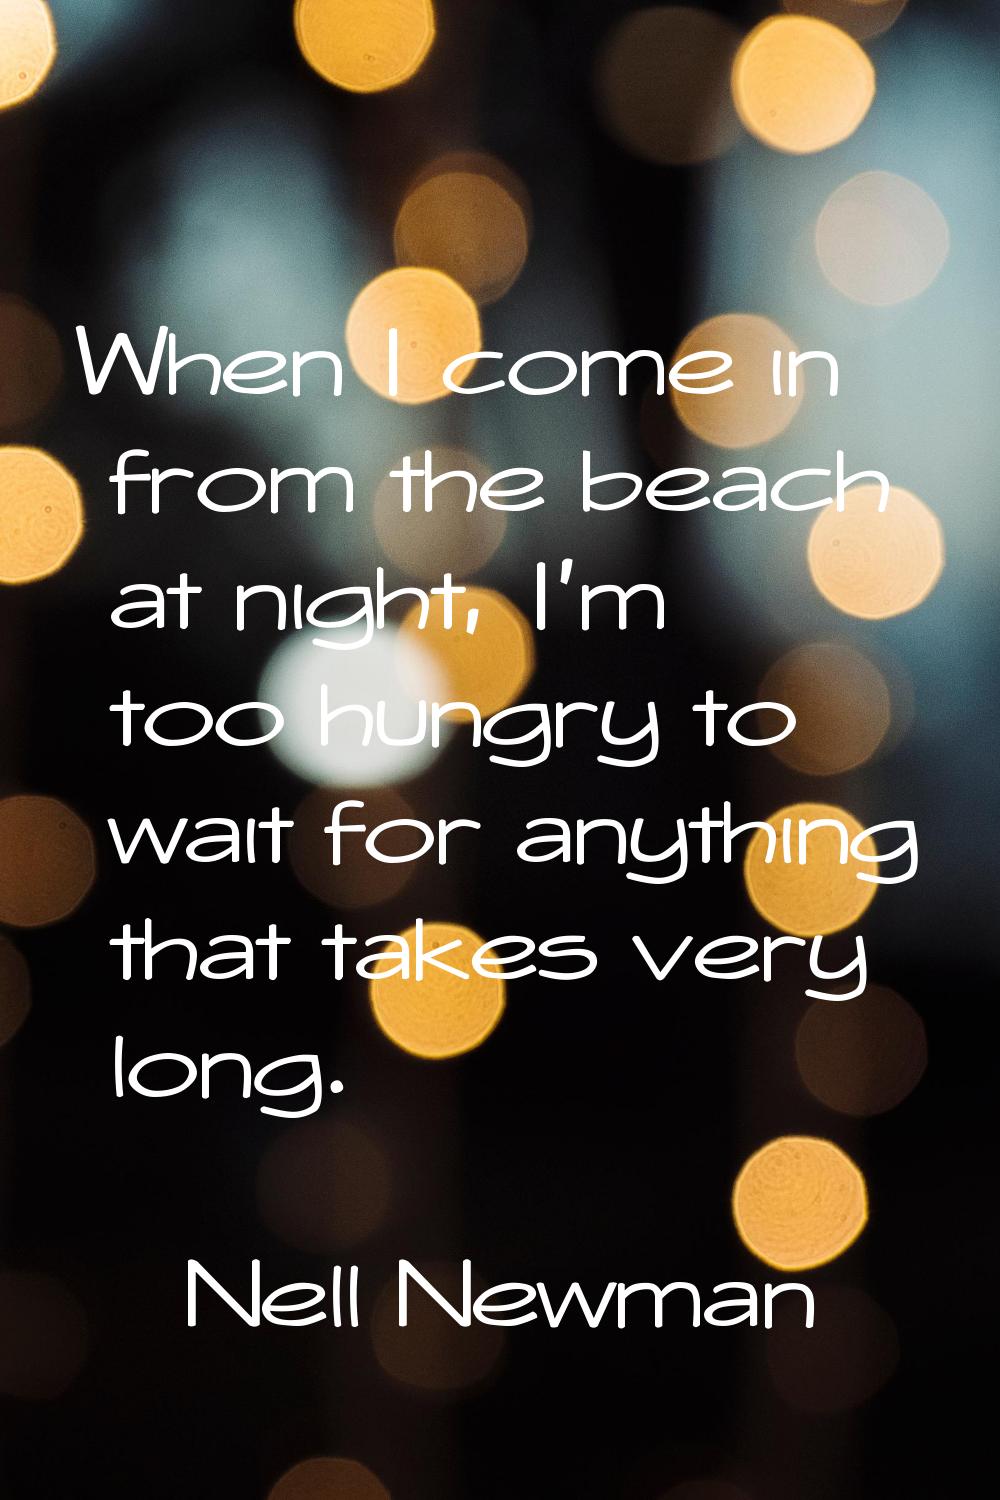 When I come in from the beach at night, I'm too hungry to wait for anything that takes very long.